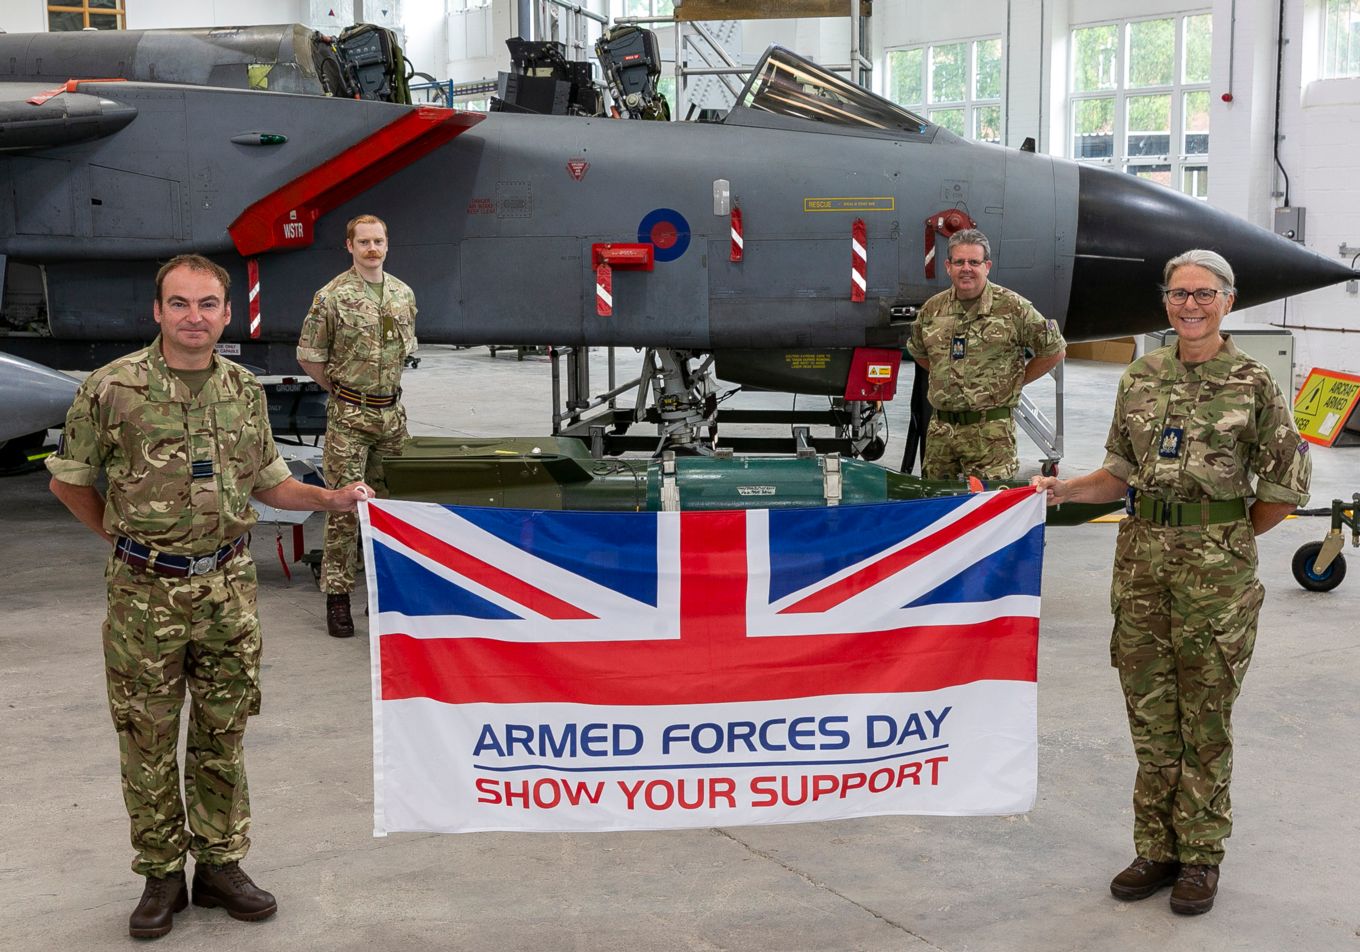 four military personnel holding the Armed Forces Day Flay inside an aircraft hangar